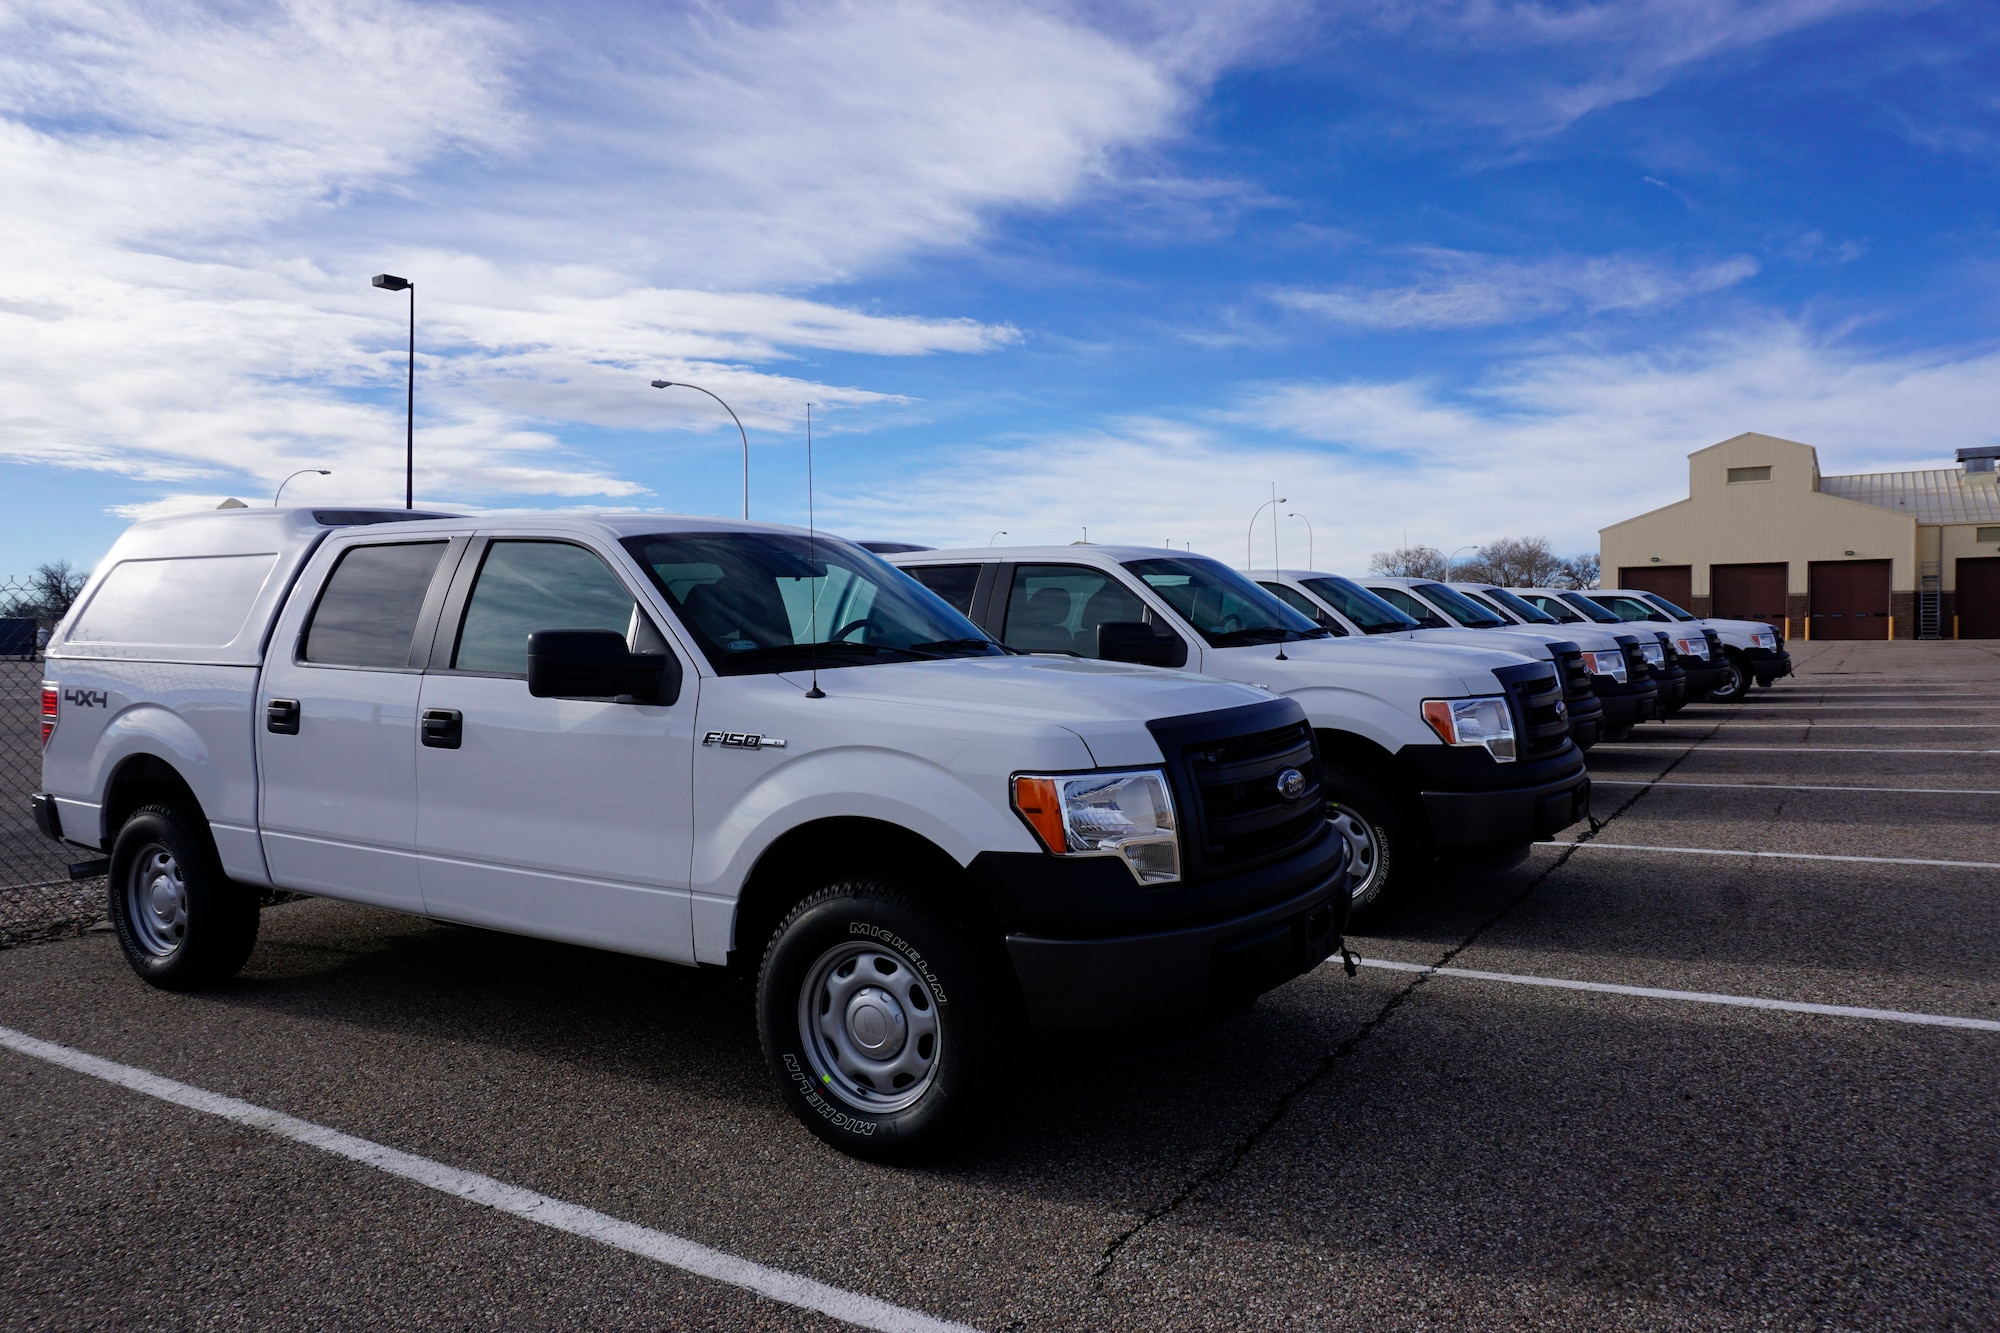 New Ford F-150s sit in the 90th Logistics Readiness Squadron’s parking lot Dec. 12, 2014 on F.E. Warren Air Force Base, Wyo. The trucks are awaiting the final clearance before being added to the distribution lists for travel to the missile field. (U.S. Air Force photo/Lan Kim)